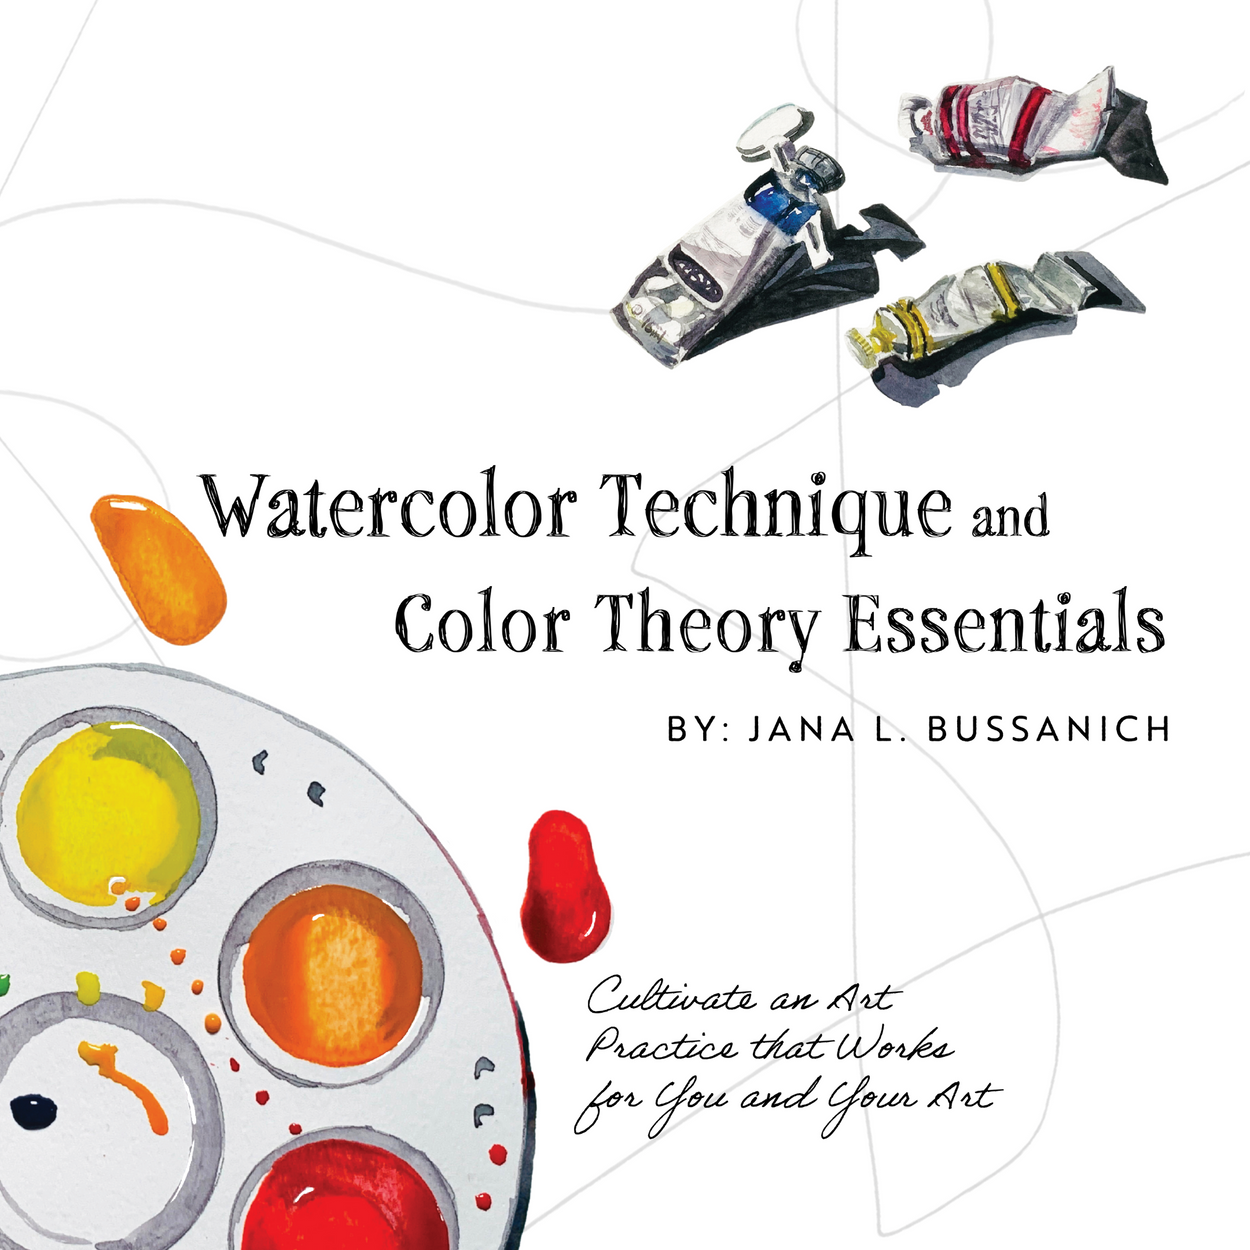 Watercolor Technique and Color Theory Essentials Book